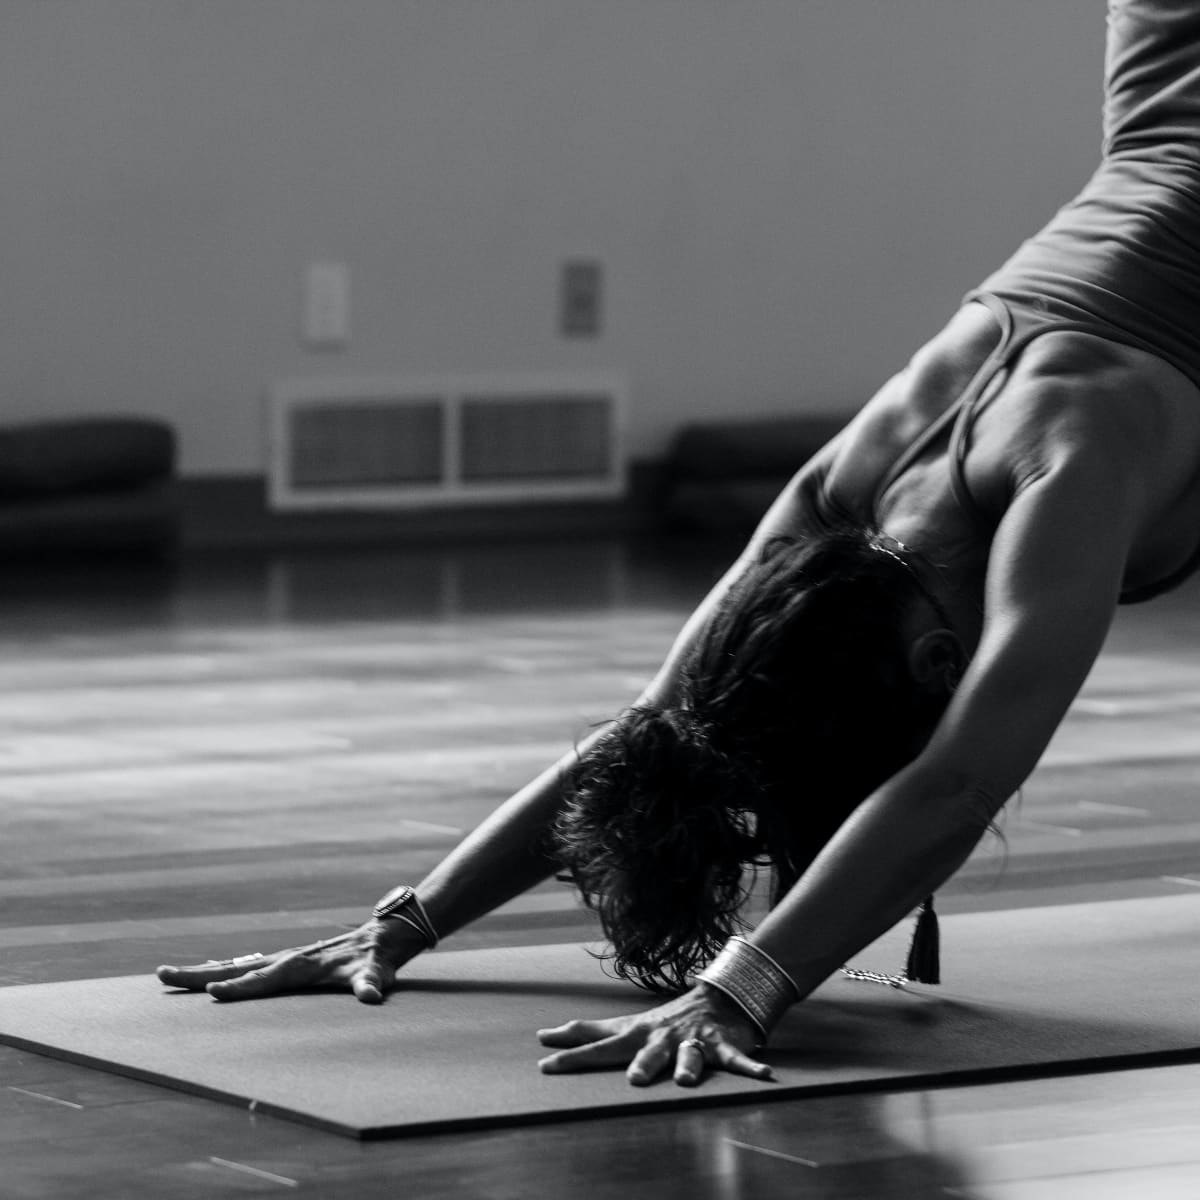 How does Bikram Yoga help with back pain? - Quora